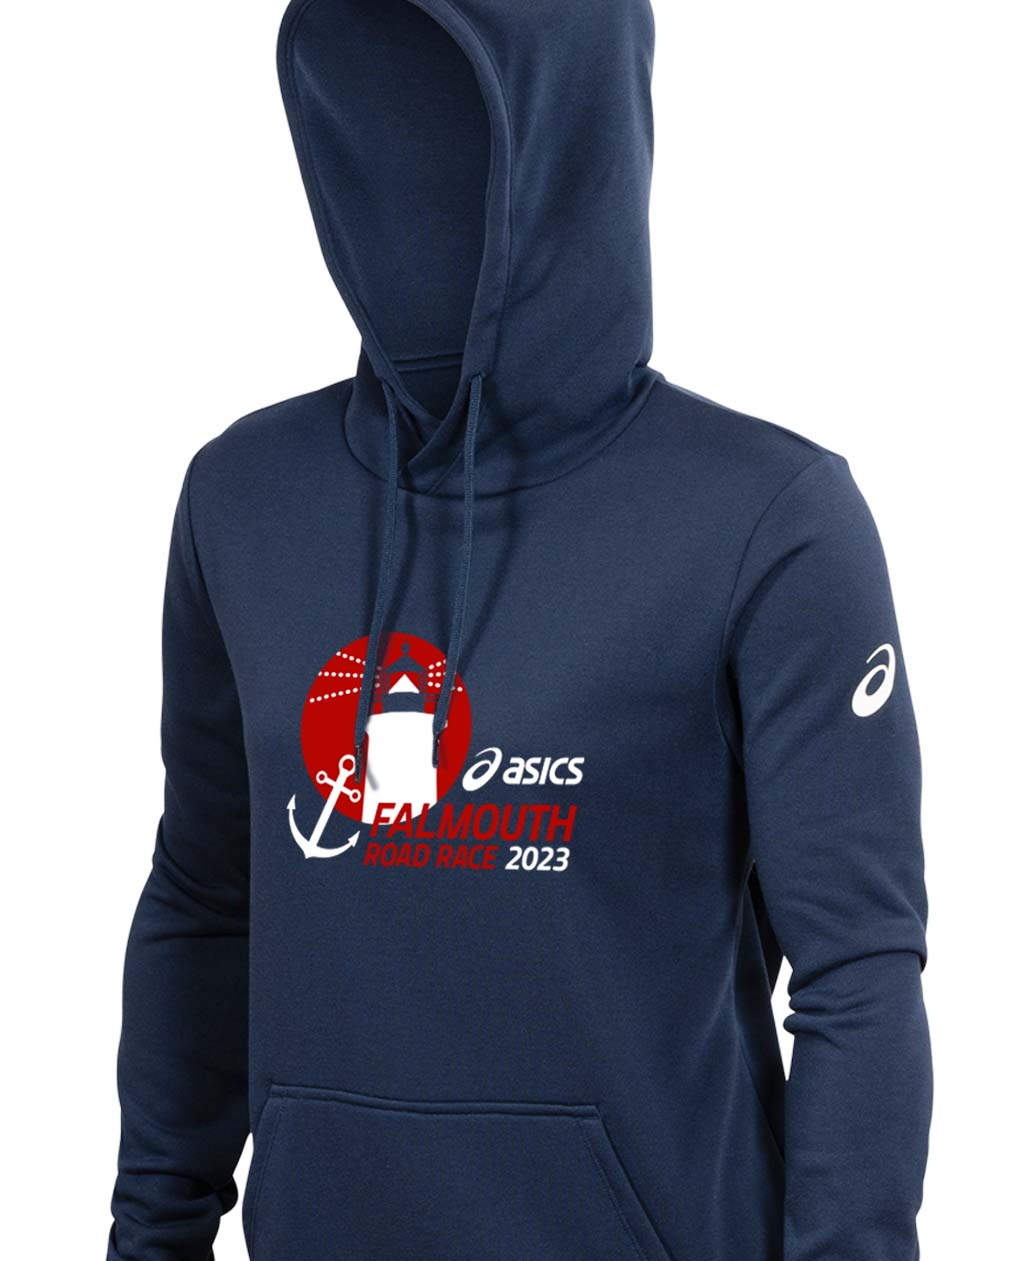 Asics Women's Falmouth Road Race 2023 French Terry Pullover Hoodie (2012D012-400)